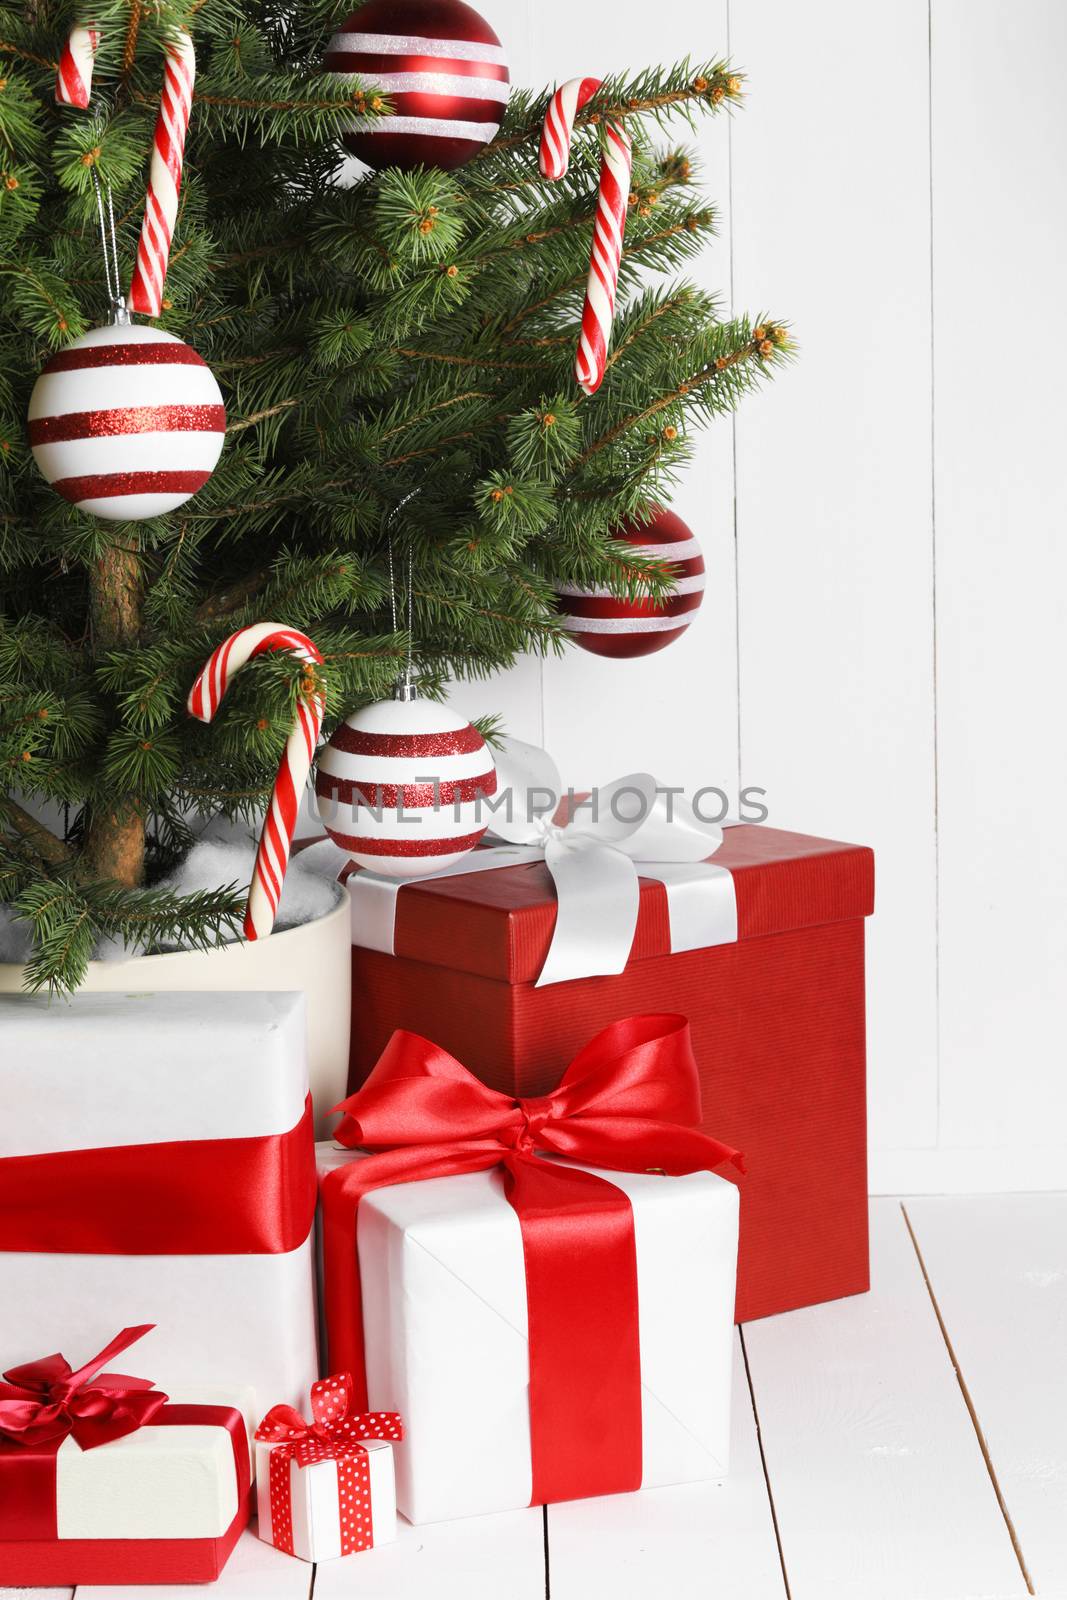 Merry christmas card with decorated christmas tree on white wooden background